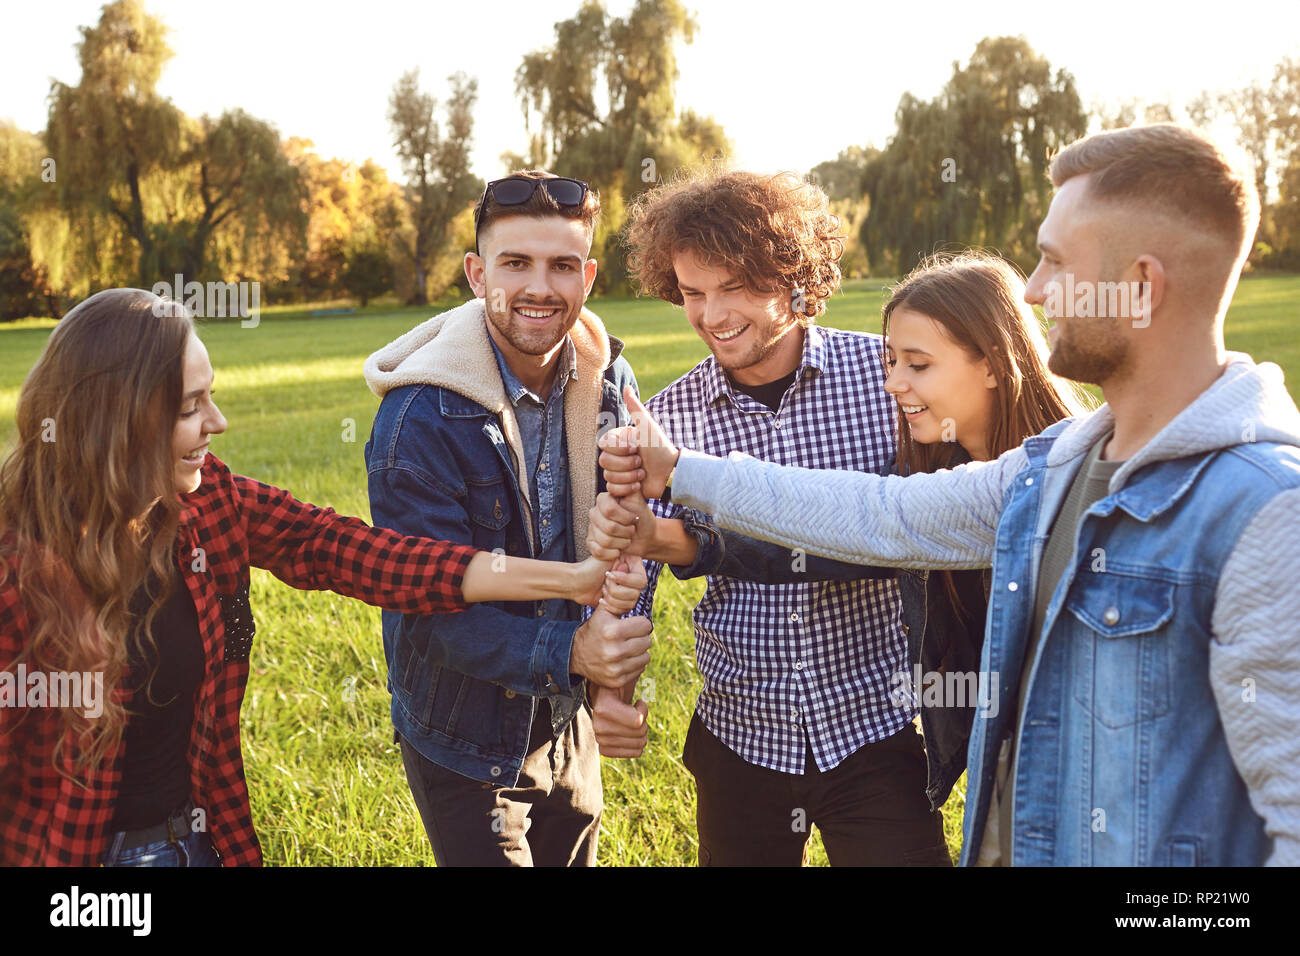 Group of friends connected thumb up in the park. Stock Photo